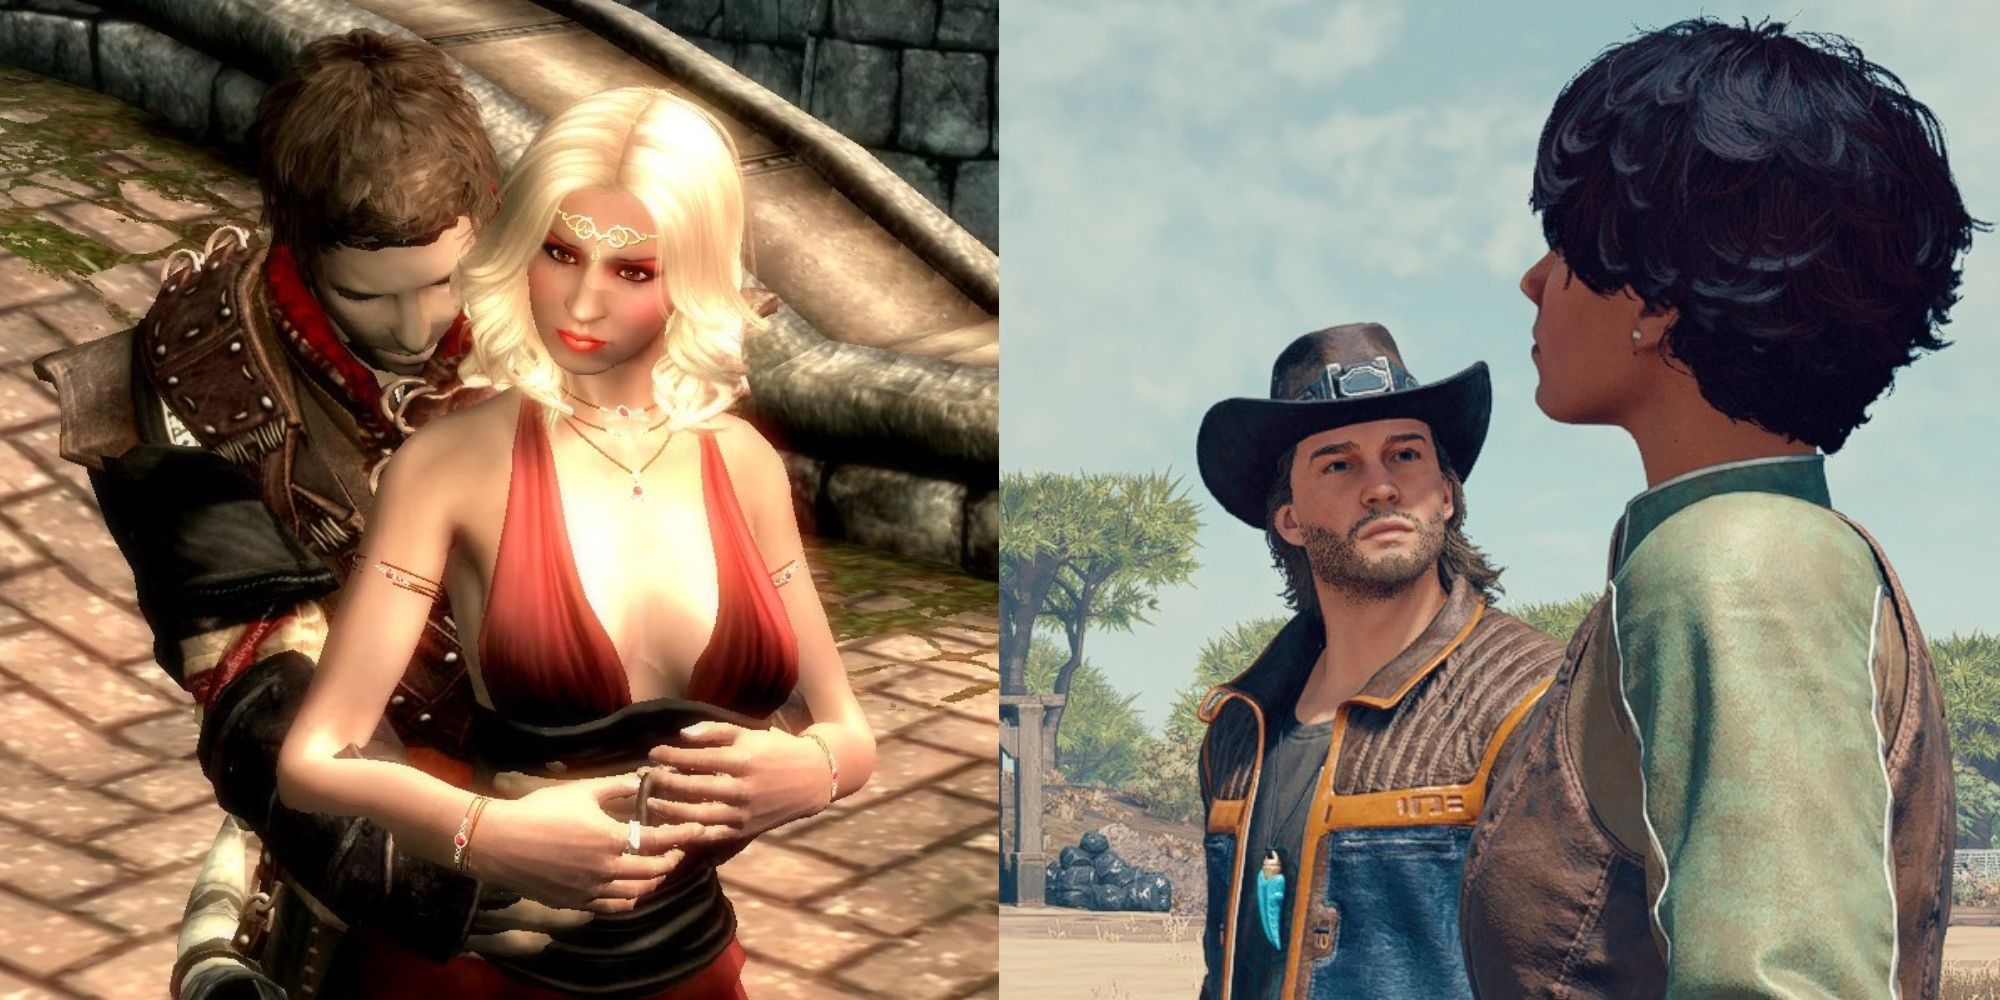 Modded Skyrim Player Holding Woman, Starfield Sam Coe looking at Player (1)